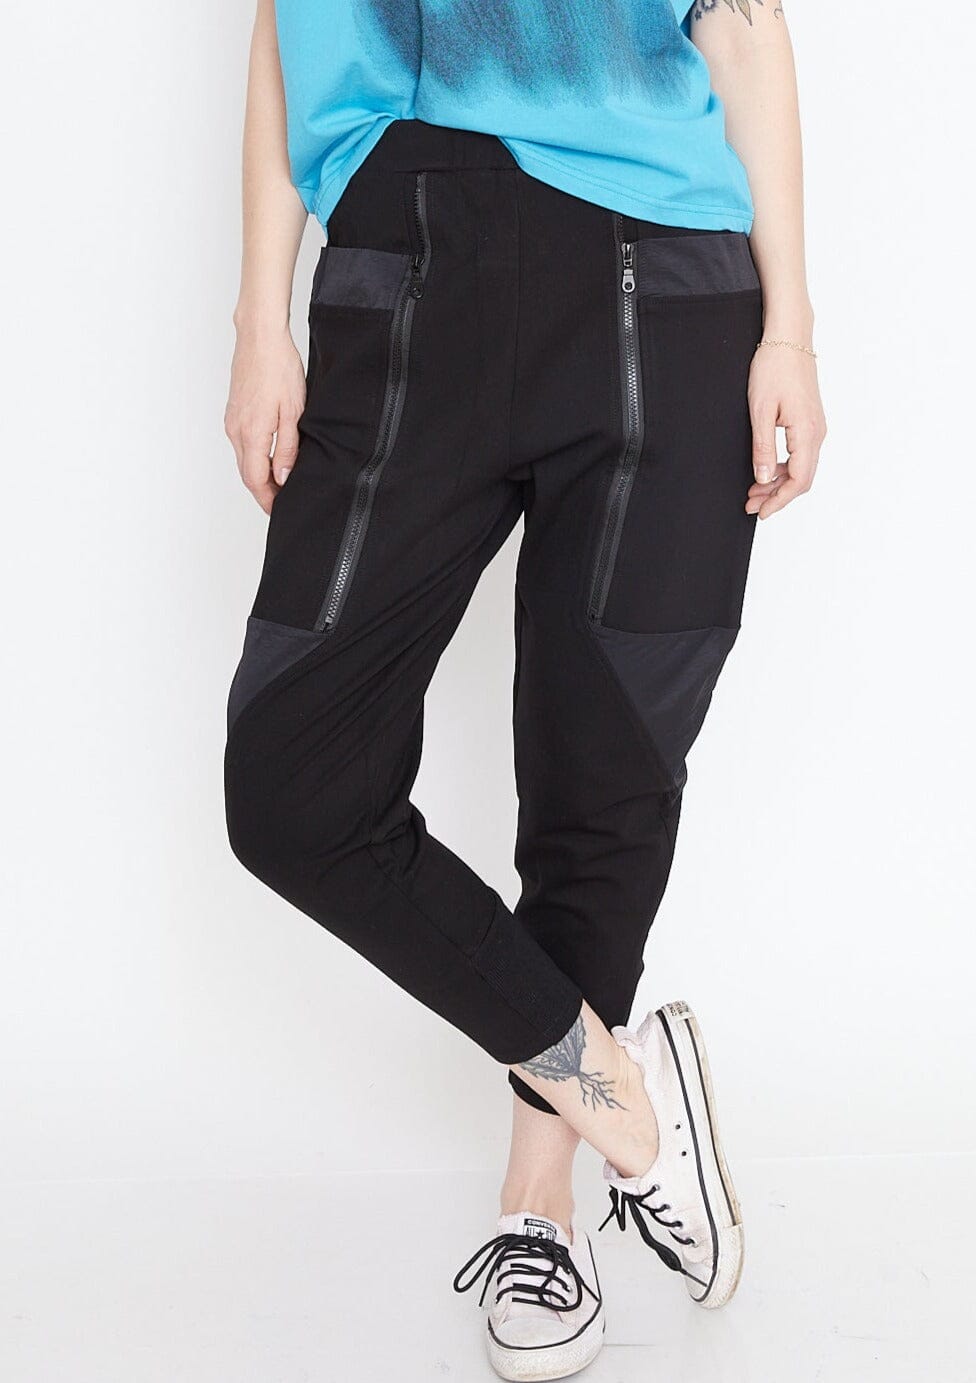 Riding Style Joggers Pants Kate Hewko S 